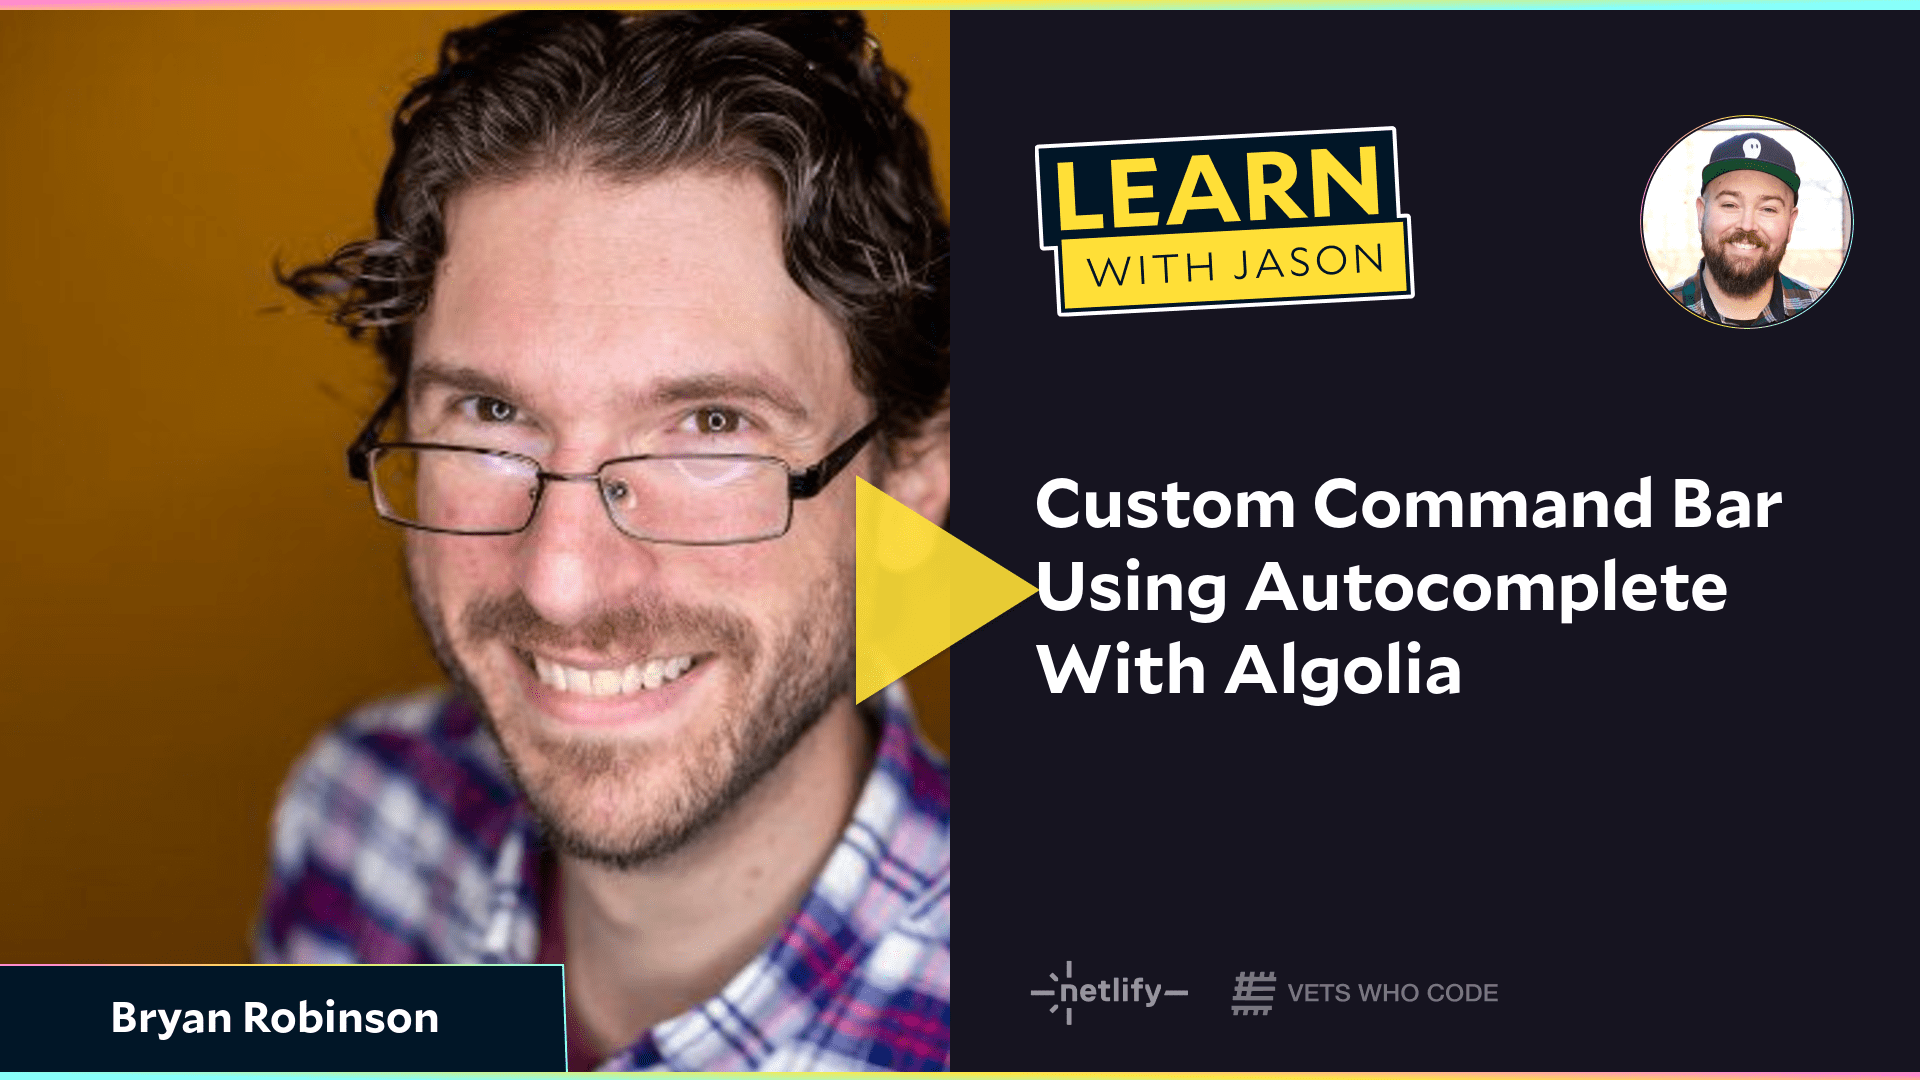 Custom Command Bar Using Autocomplete With Algolia (with Bryan Robinson)